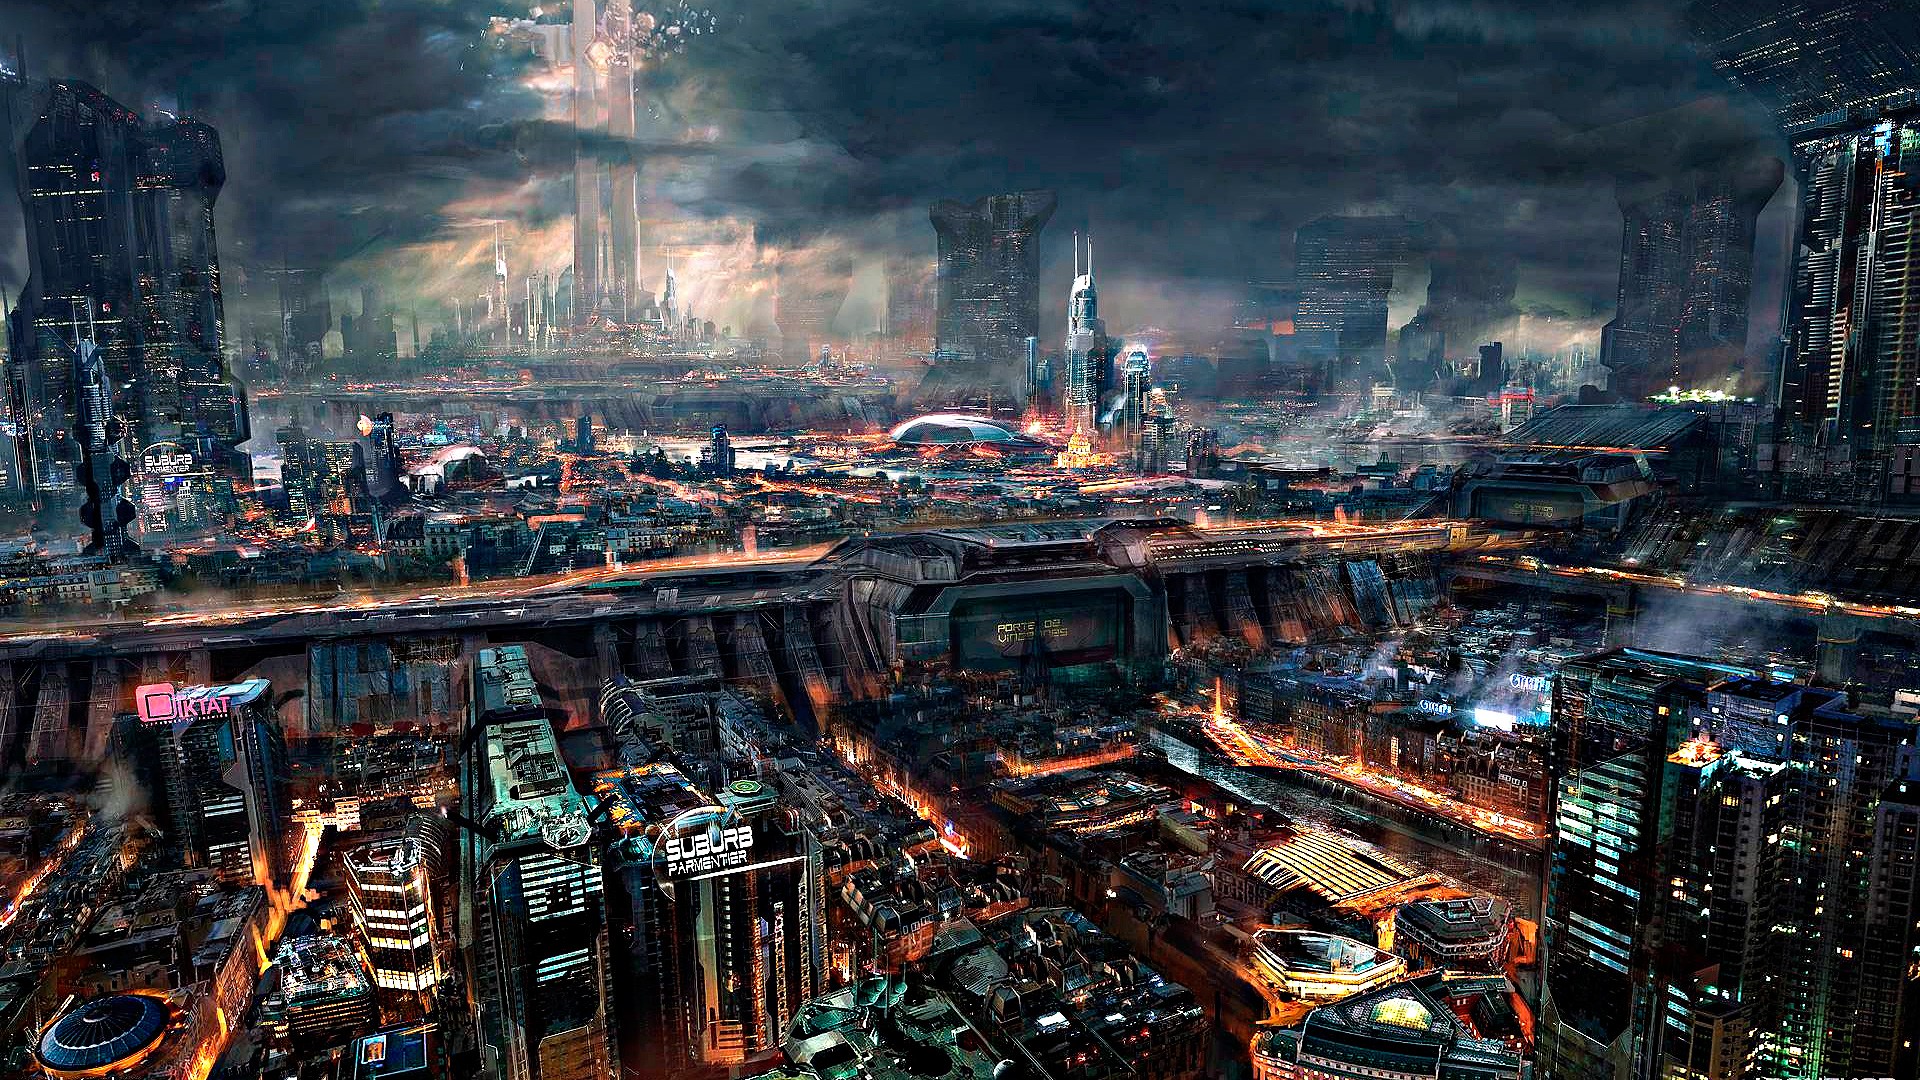 General 1920x1080 cyberpunk science fiction city Remember Me futuristic city video games PC gaming video game art Paul Chadeisson